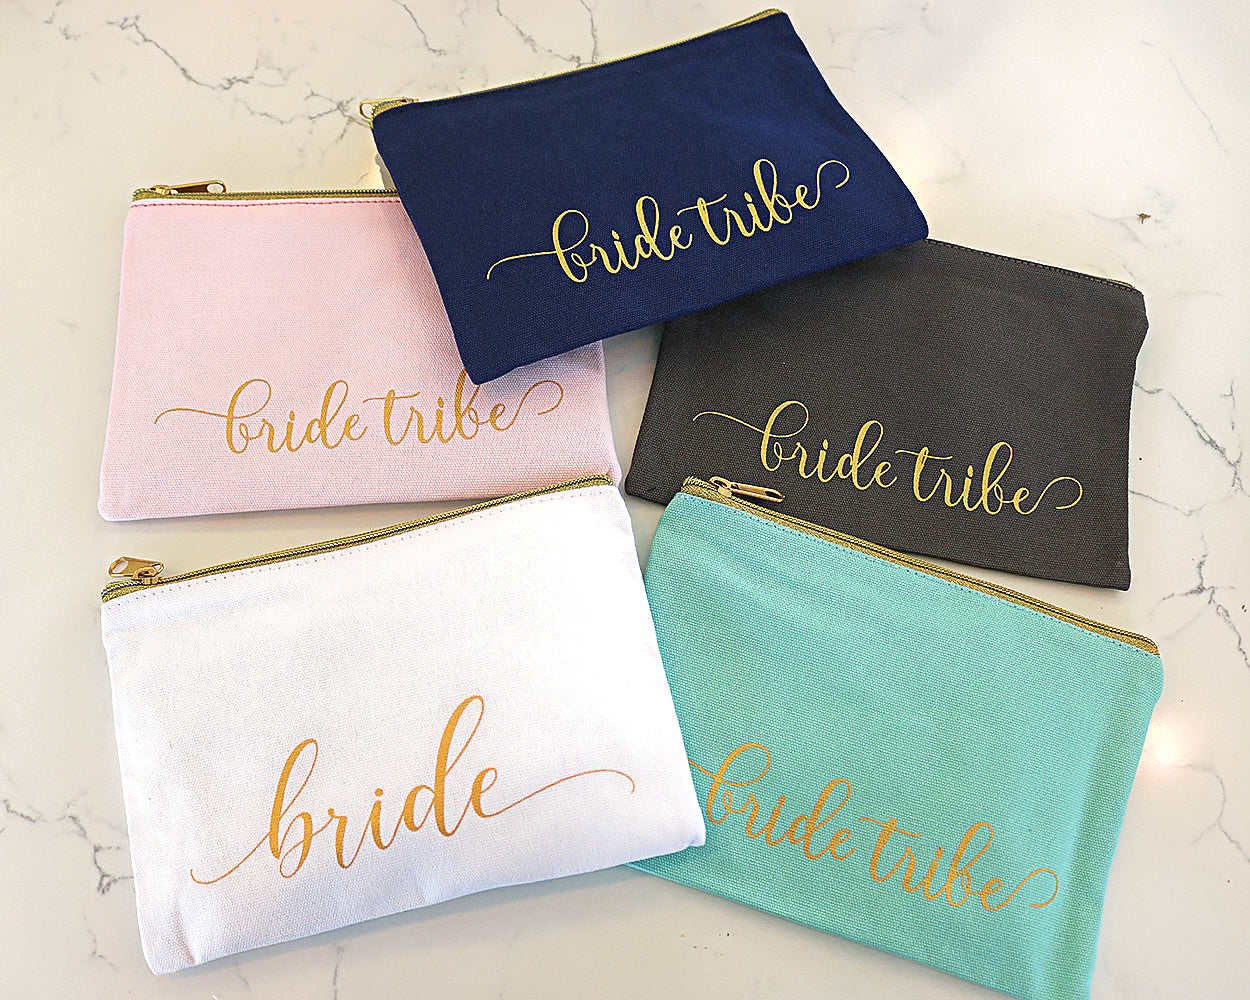 Bride Tribe Bridesmaid Canvas Makeup Bags Cosmetic Clutch (Turquoise) | 8 Piece Set